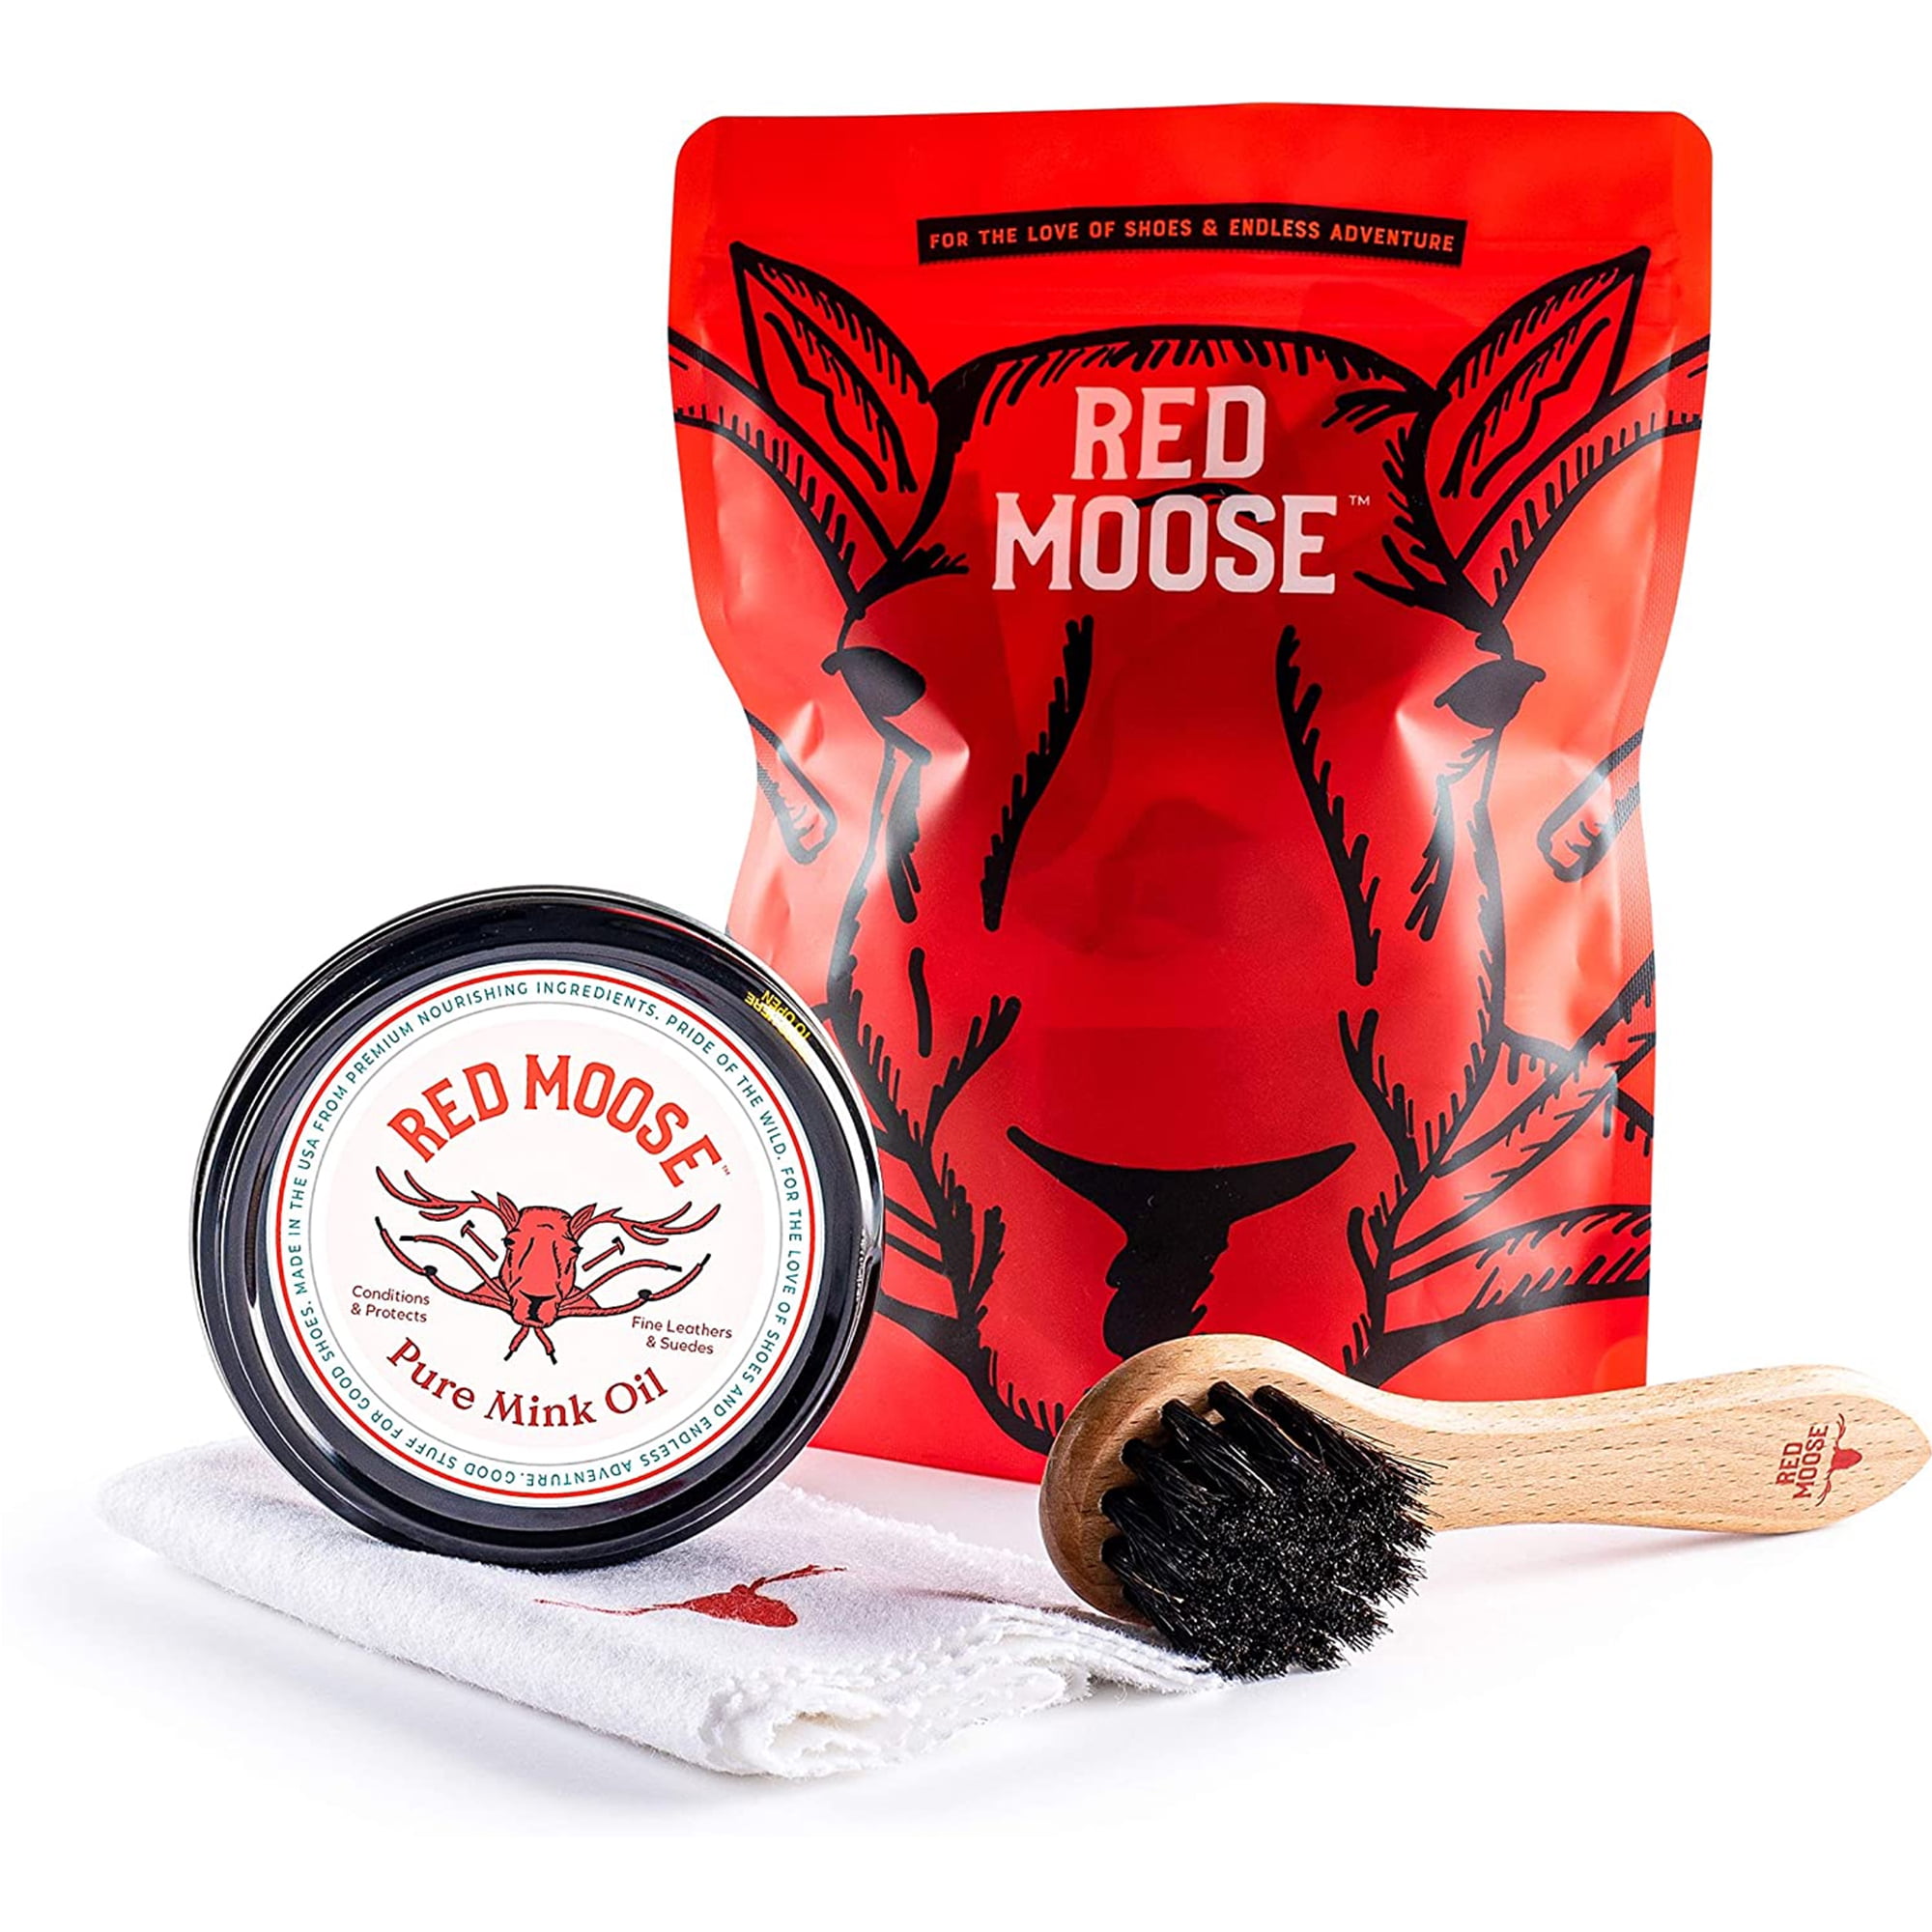 Red Moose Shoe and Sneaker Whitener - Red - 3245 requests